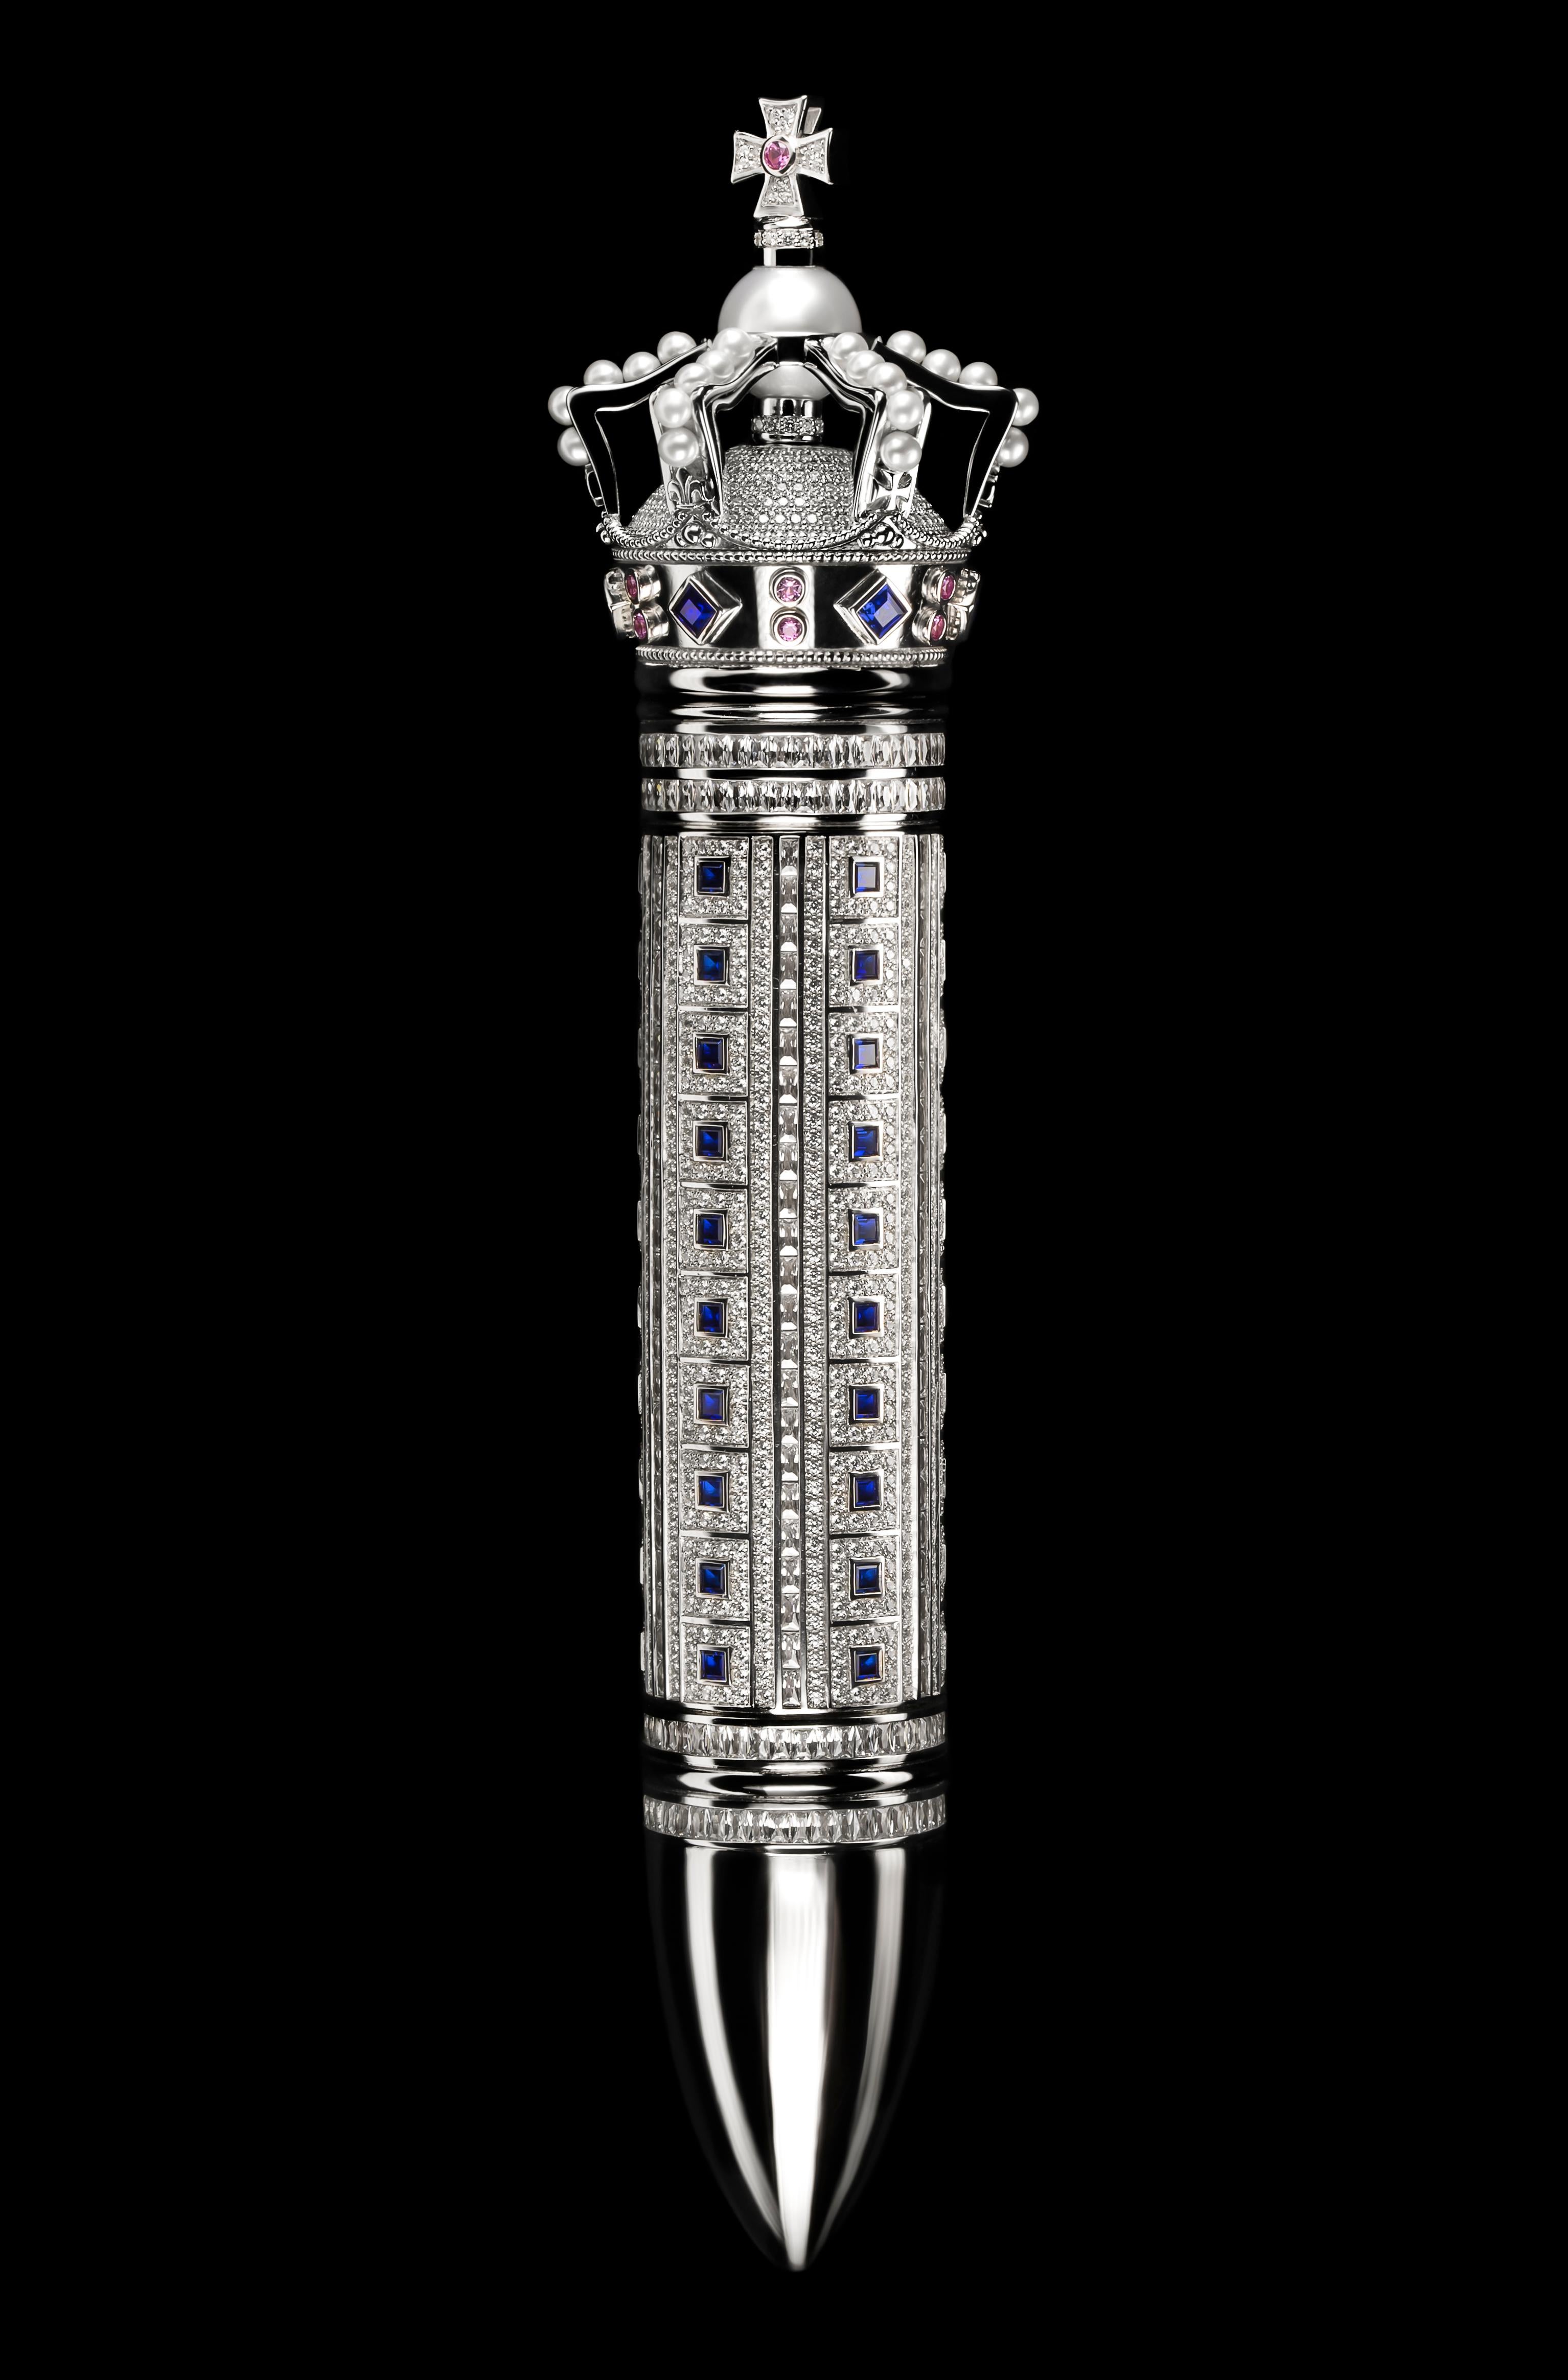 The Pearl Royale is without a doubt the world's most luxurious vibrator ever created. Crafted by Australian jewelry artist Colin Burn for his Treasure The Erotic collection, the Pearl Royale Vibrator is a unique sculptural art piece made from pure